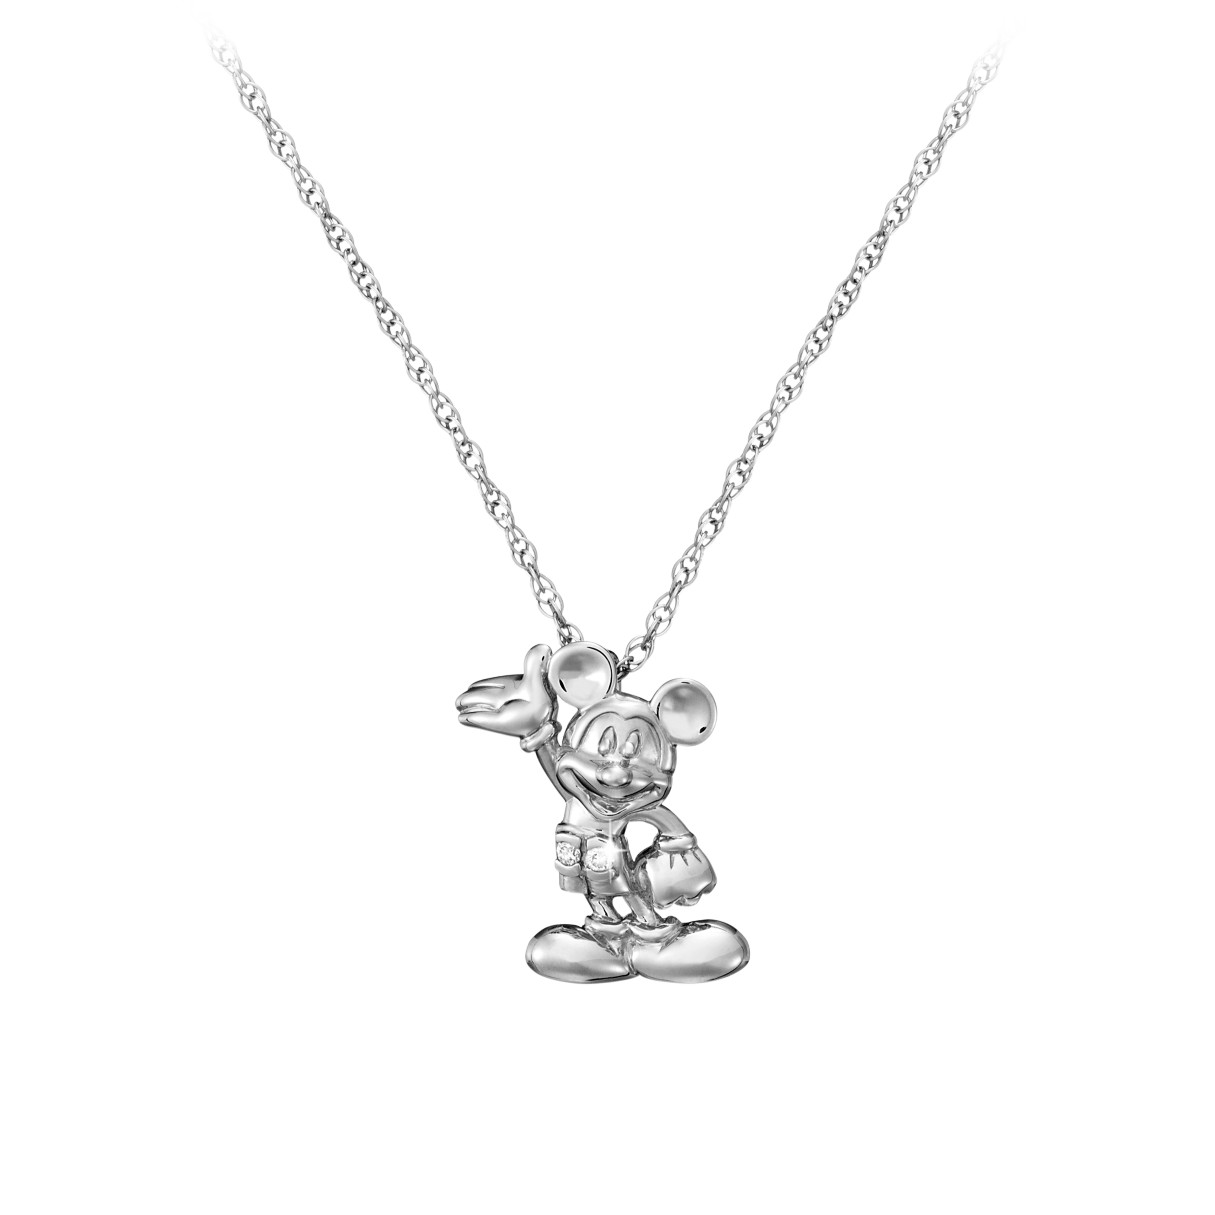 Mickey Mouse Necklace – Mickey Figure